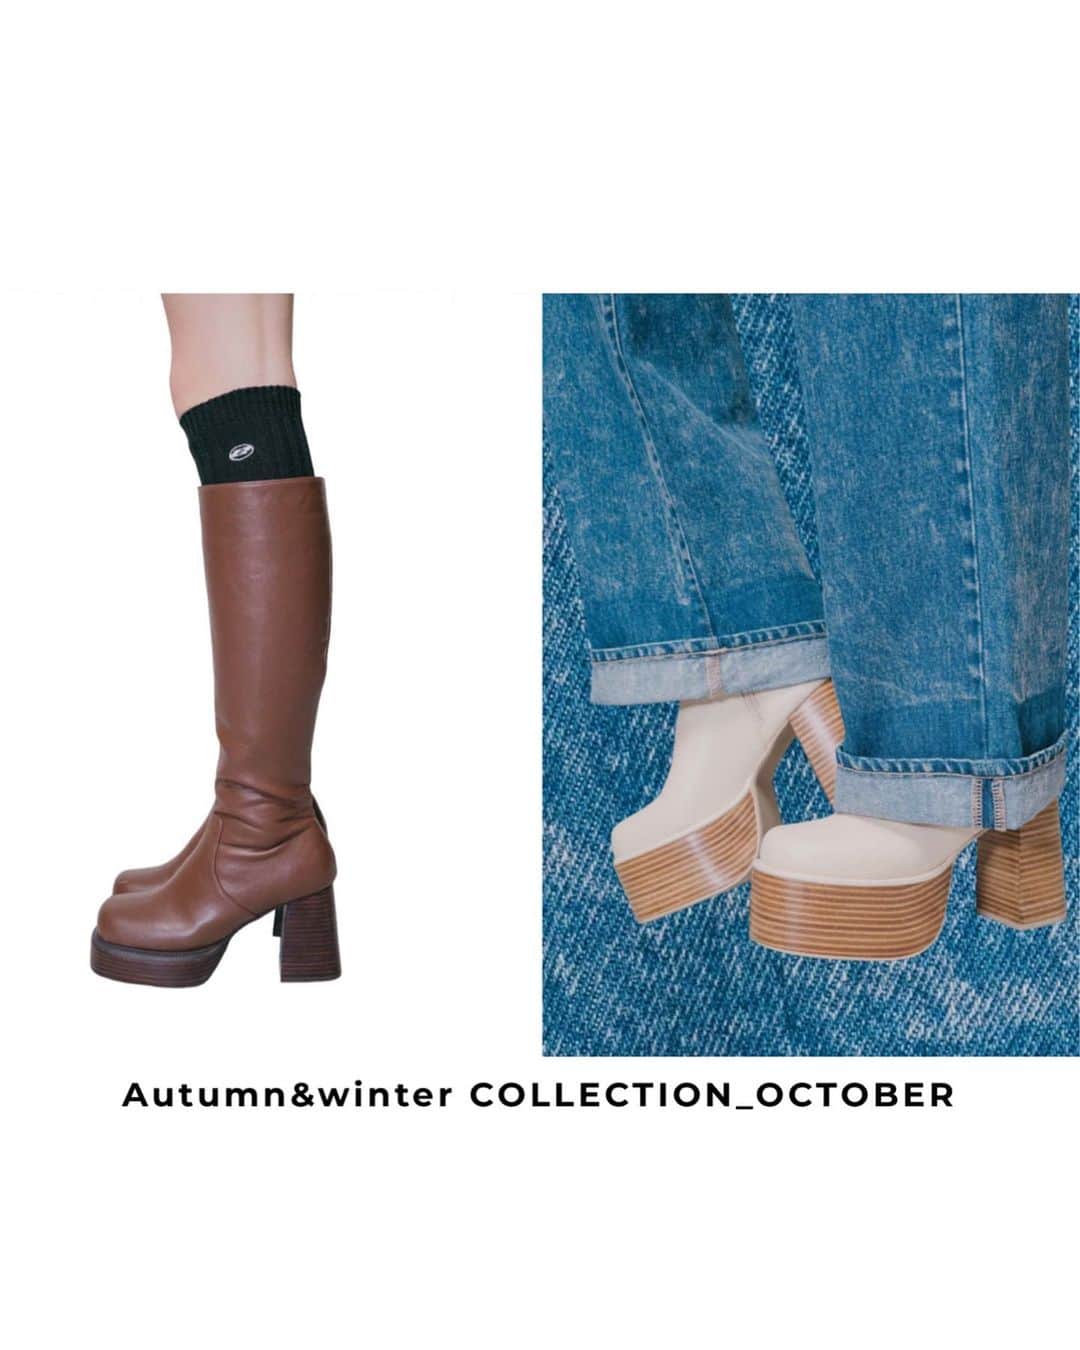 EMODAさんのインスタグラム写真 - (EMODAInstagram)「ㅤㅤㅤㅤㅤㅤㅤㅤㅤㅤㅤㅤ '23 autumn&winter October new item ㅤㅤㅤ  ・ROUND SQUARE LONG BOOTS ￥ 17,380 tax'in ・SIDE GORE ROUND BOOTS ￥ 16,280 tax'in ＿＿＿＿＿＿＿＿＿＿＿＿＿＿＿＿＿＿＿＿＿＿＿＿ ◆◆MAX94%OFF◆◆ Limited OUTLET SALE開催中！！  ＞衝撃プライス＜ 人気アイテムが今だけスーパーセール価格に!!!! 10/6(FRI)12:00～10/10(TUE)23:59  詳細は( @emoda_official )のTOPのURL,storiesチェック✔️ ＿＿＿＿＿＿＿＿＿＿＿＿＿＿＿＿＿＿＿＿＿＿＿＿ㅤㅤ ㅤㅤㅤㅤㅤㅤ #EMODA #EMODA_SHOES #boots #ロングブーツ #ショートブーツ #サイドゴアブーツ #RUNWAYchannel #2023AW #autumn #winter @emoda_snap」10月9日 19時12分 - emoda_official